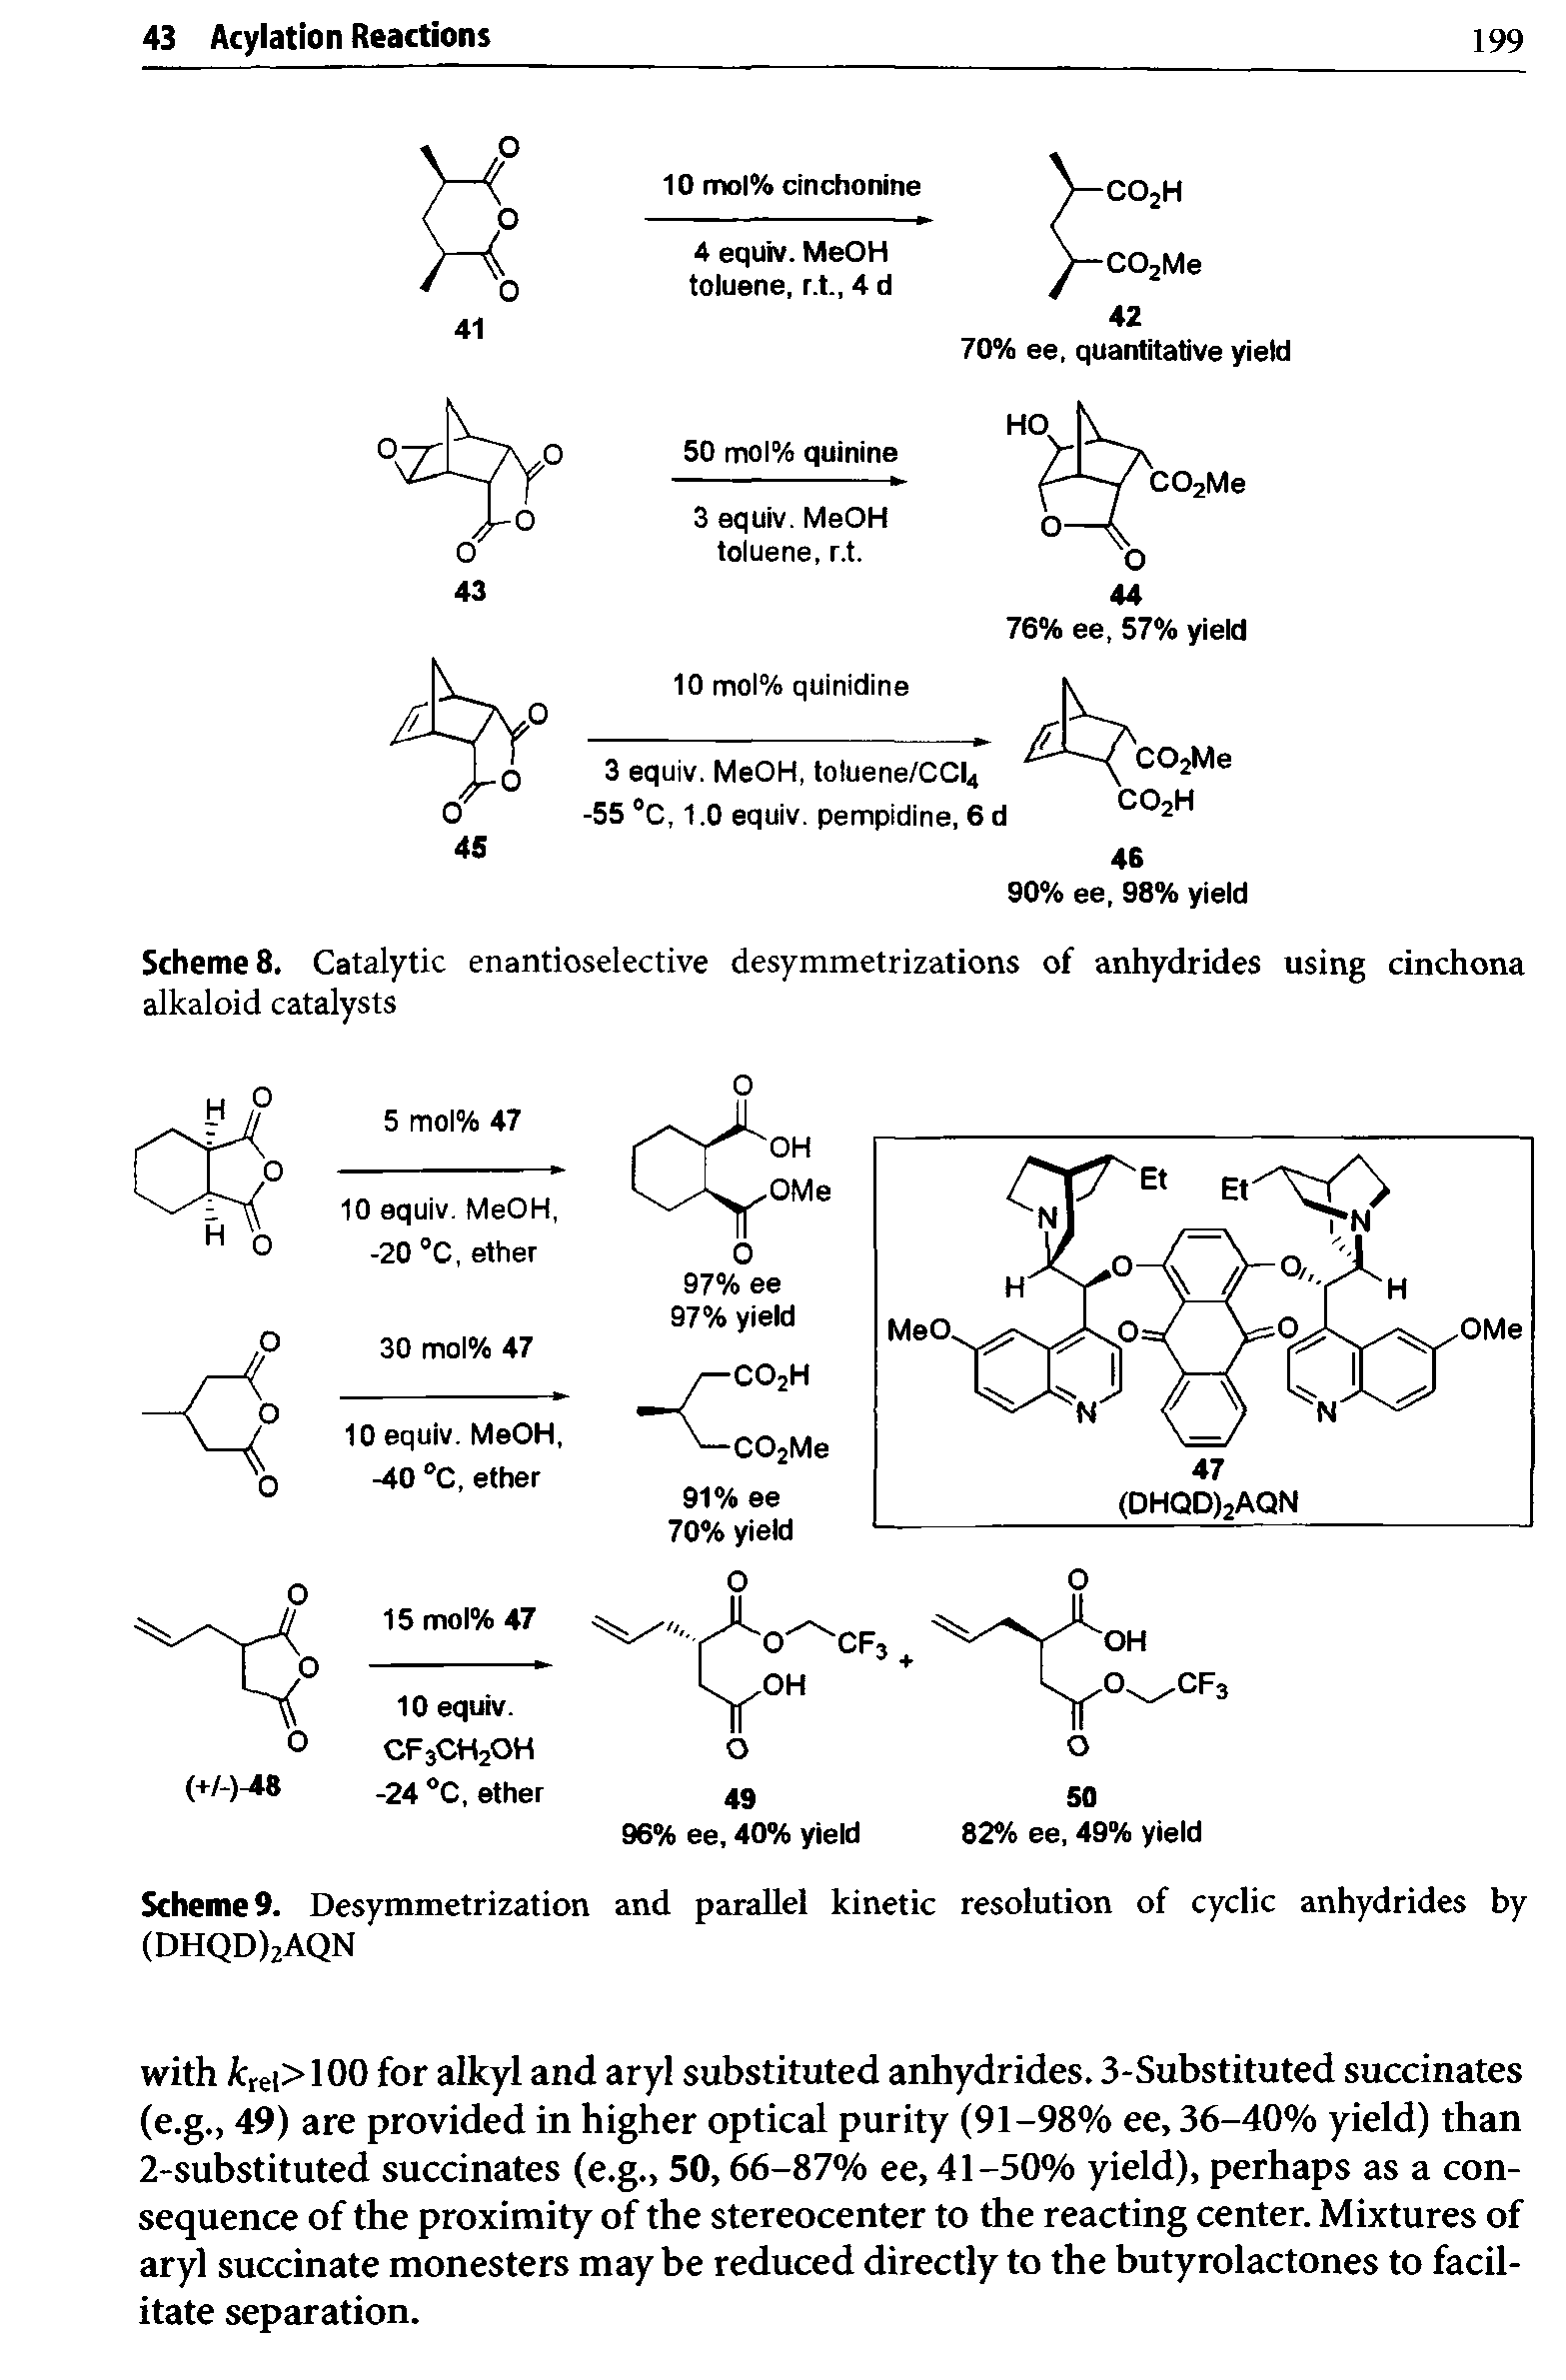 Scheme 8. Catalytic enantioselective desymmetrizations of anhydrides using cinchona alkaloid catalysts...